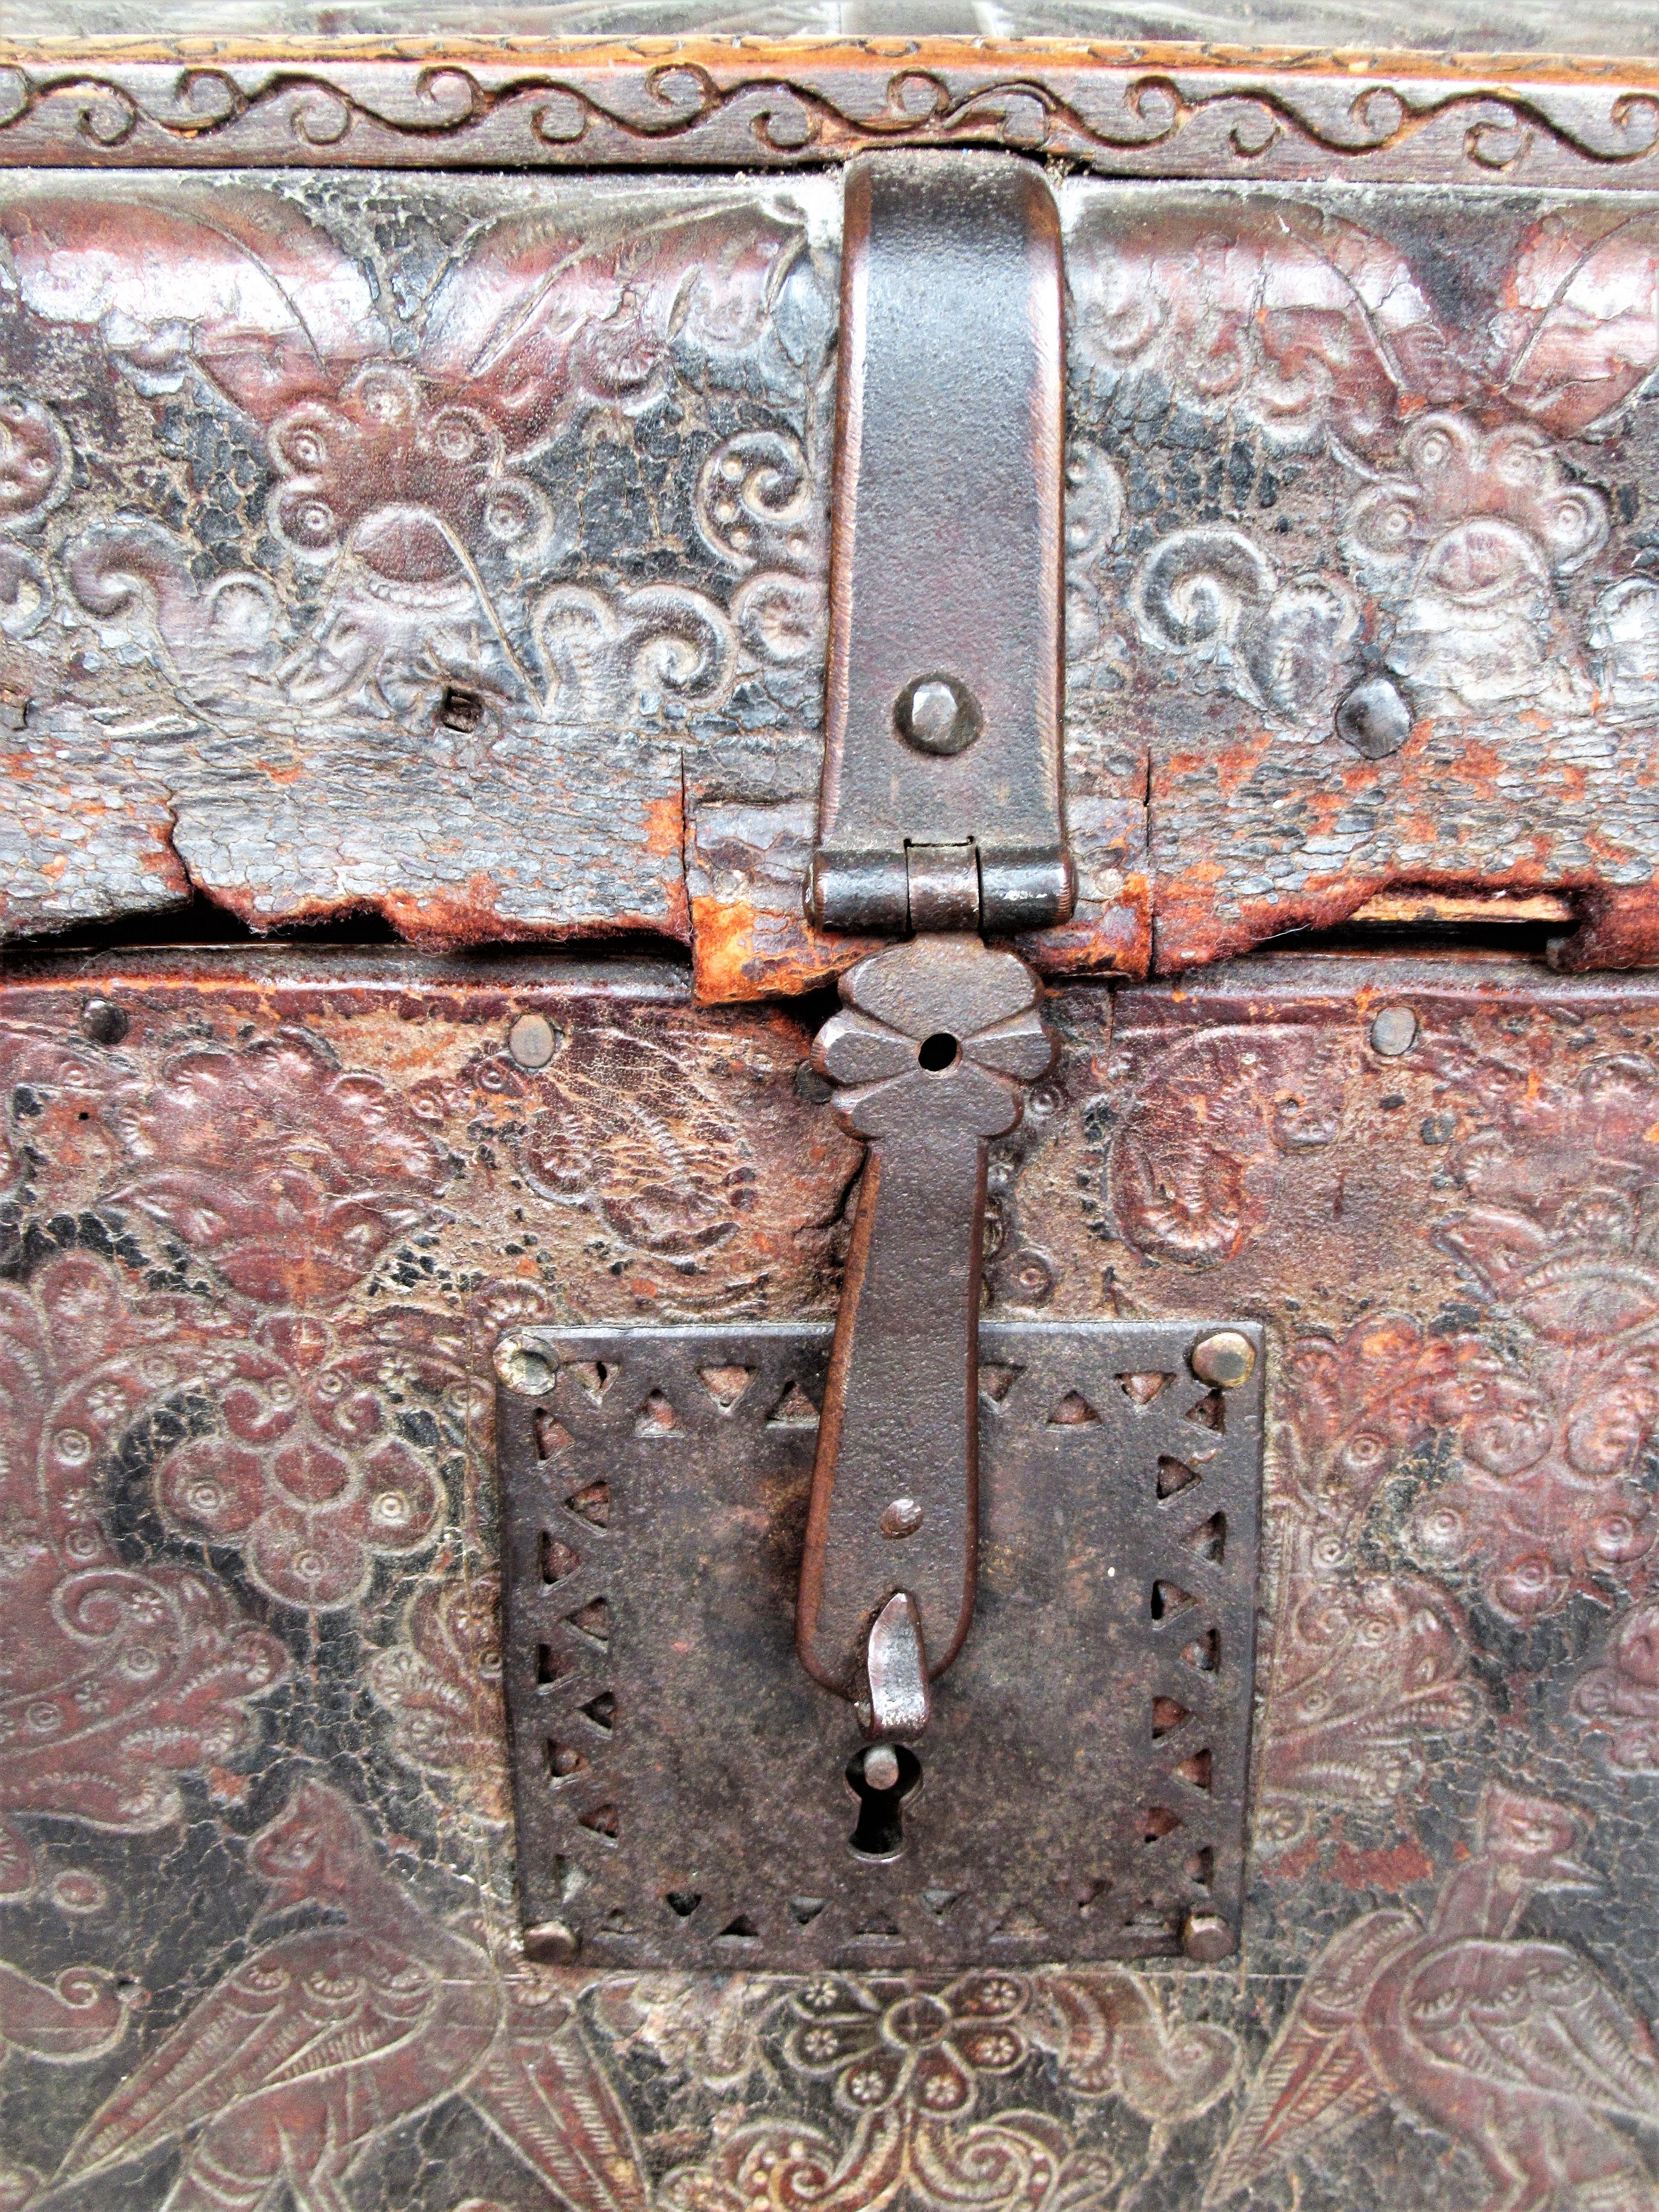 Antique Spanish hand tooled leather covered wood trunk w/ period hand wrought iron hardware, locks, handles, escutcheons. Beautifully aged original surface w/ finely detailed decorations - eagle birds, shields, heraldic symbols. Late 17th century -